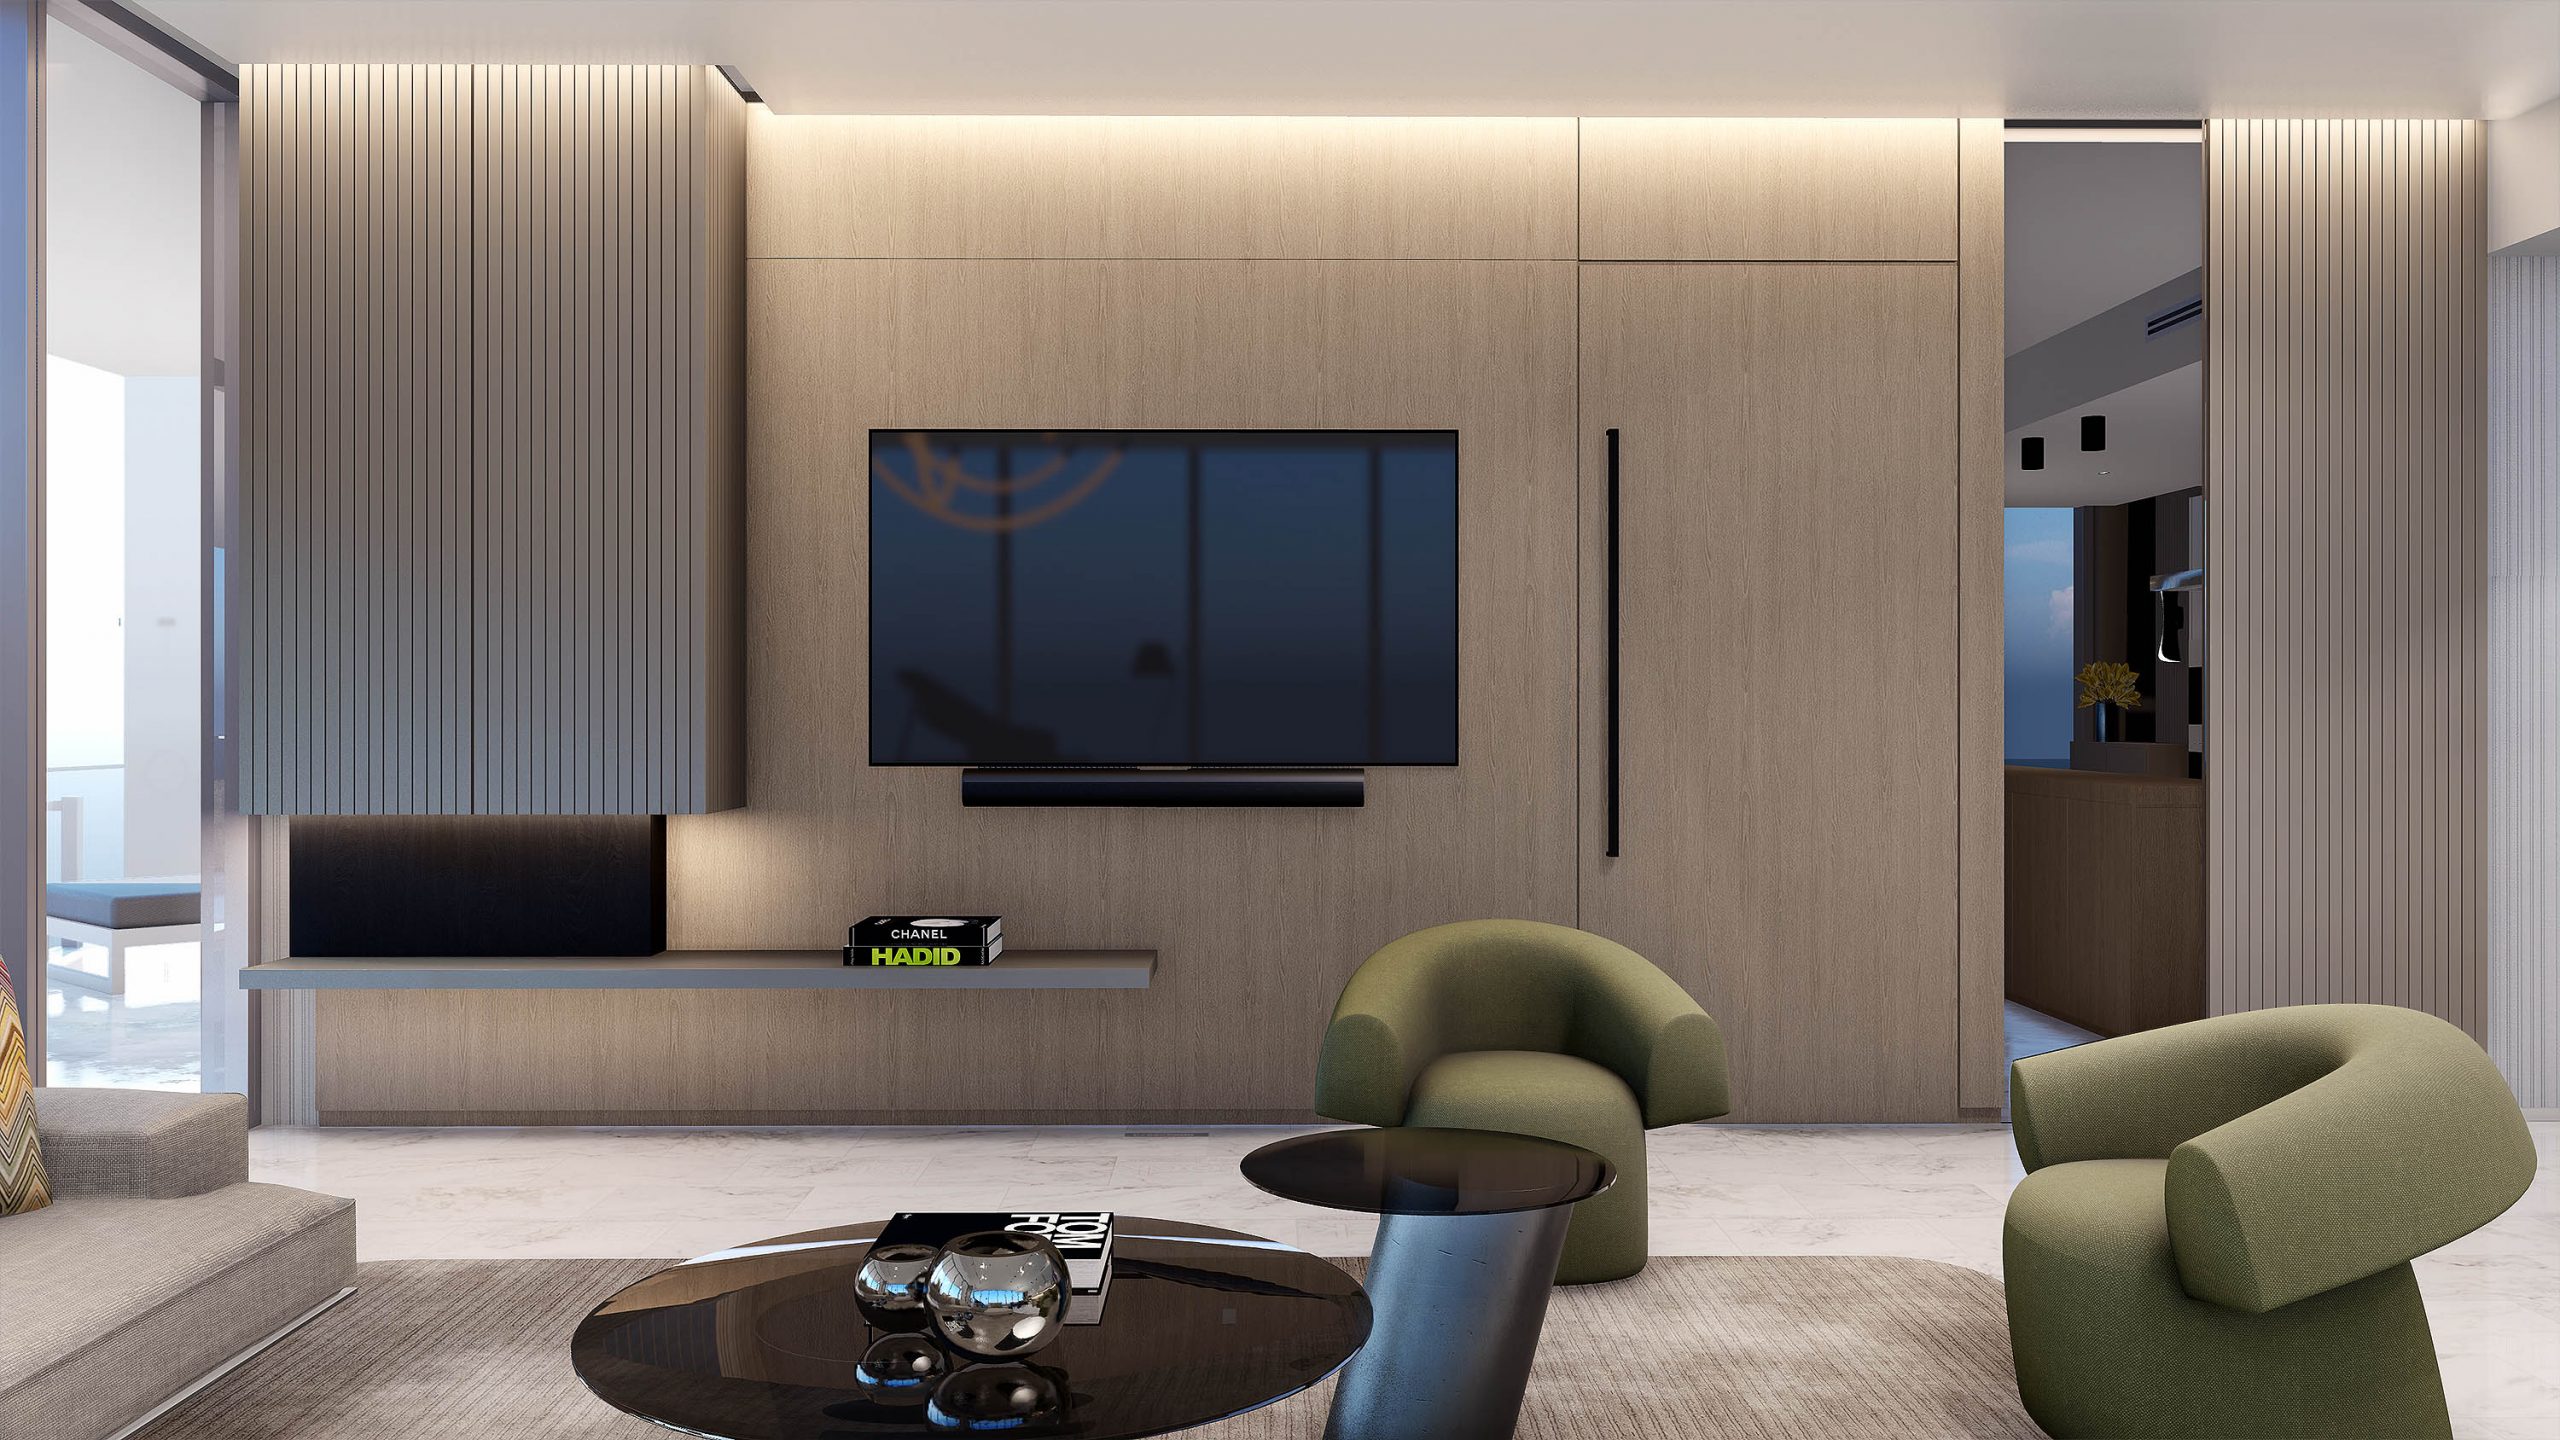 Contemporary and living room with minimalist wood panels and details in taupe lacquer, hidden door, large TV and stylish lounge chairs with moss green fabric.